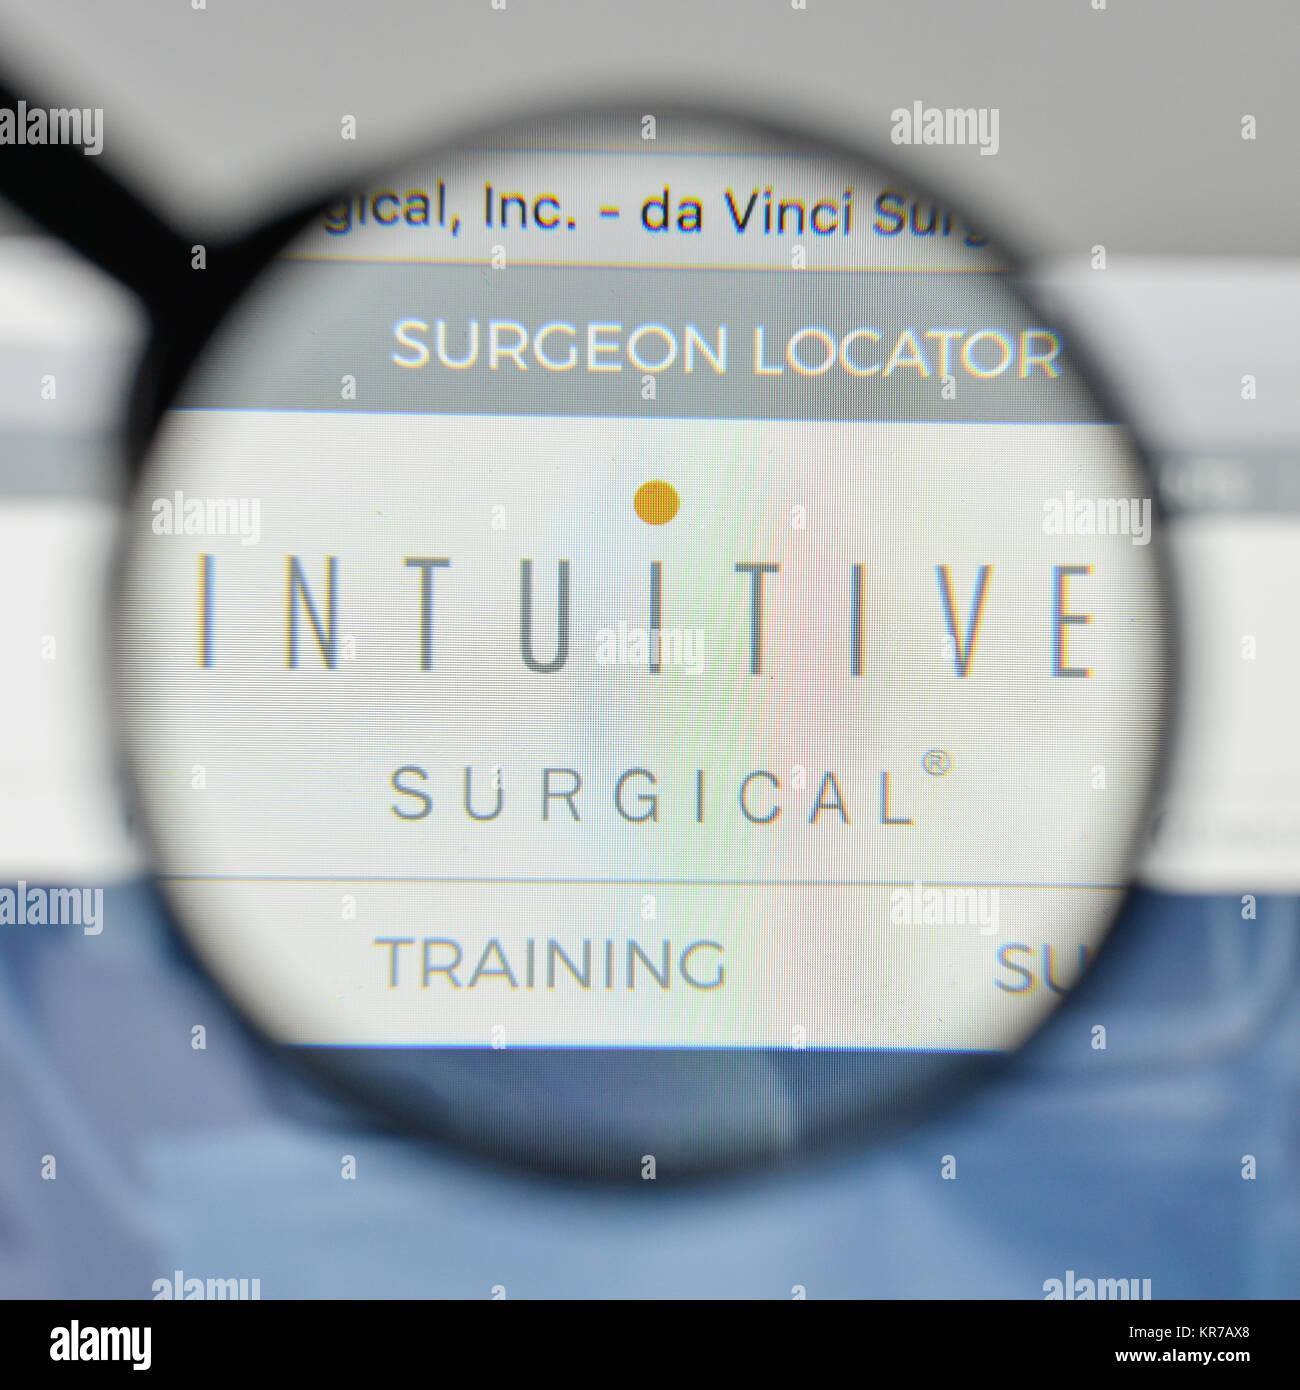 intuitive surgical logo